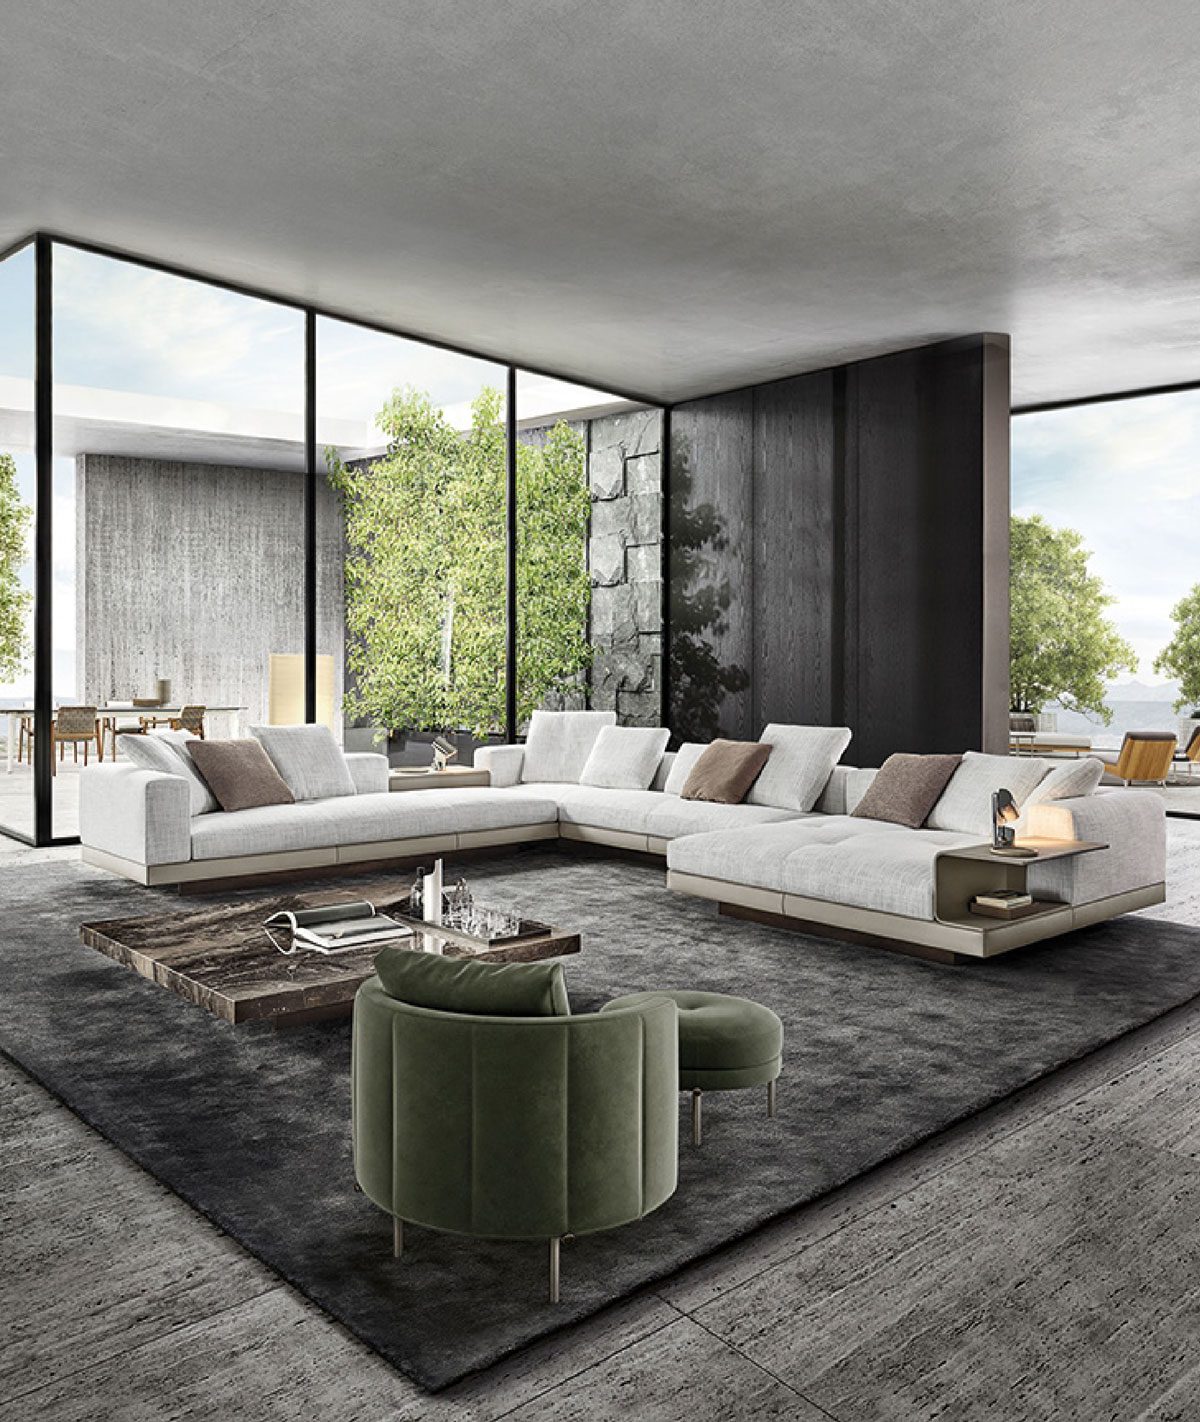 The Minotti Collection